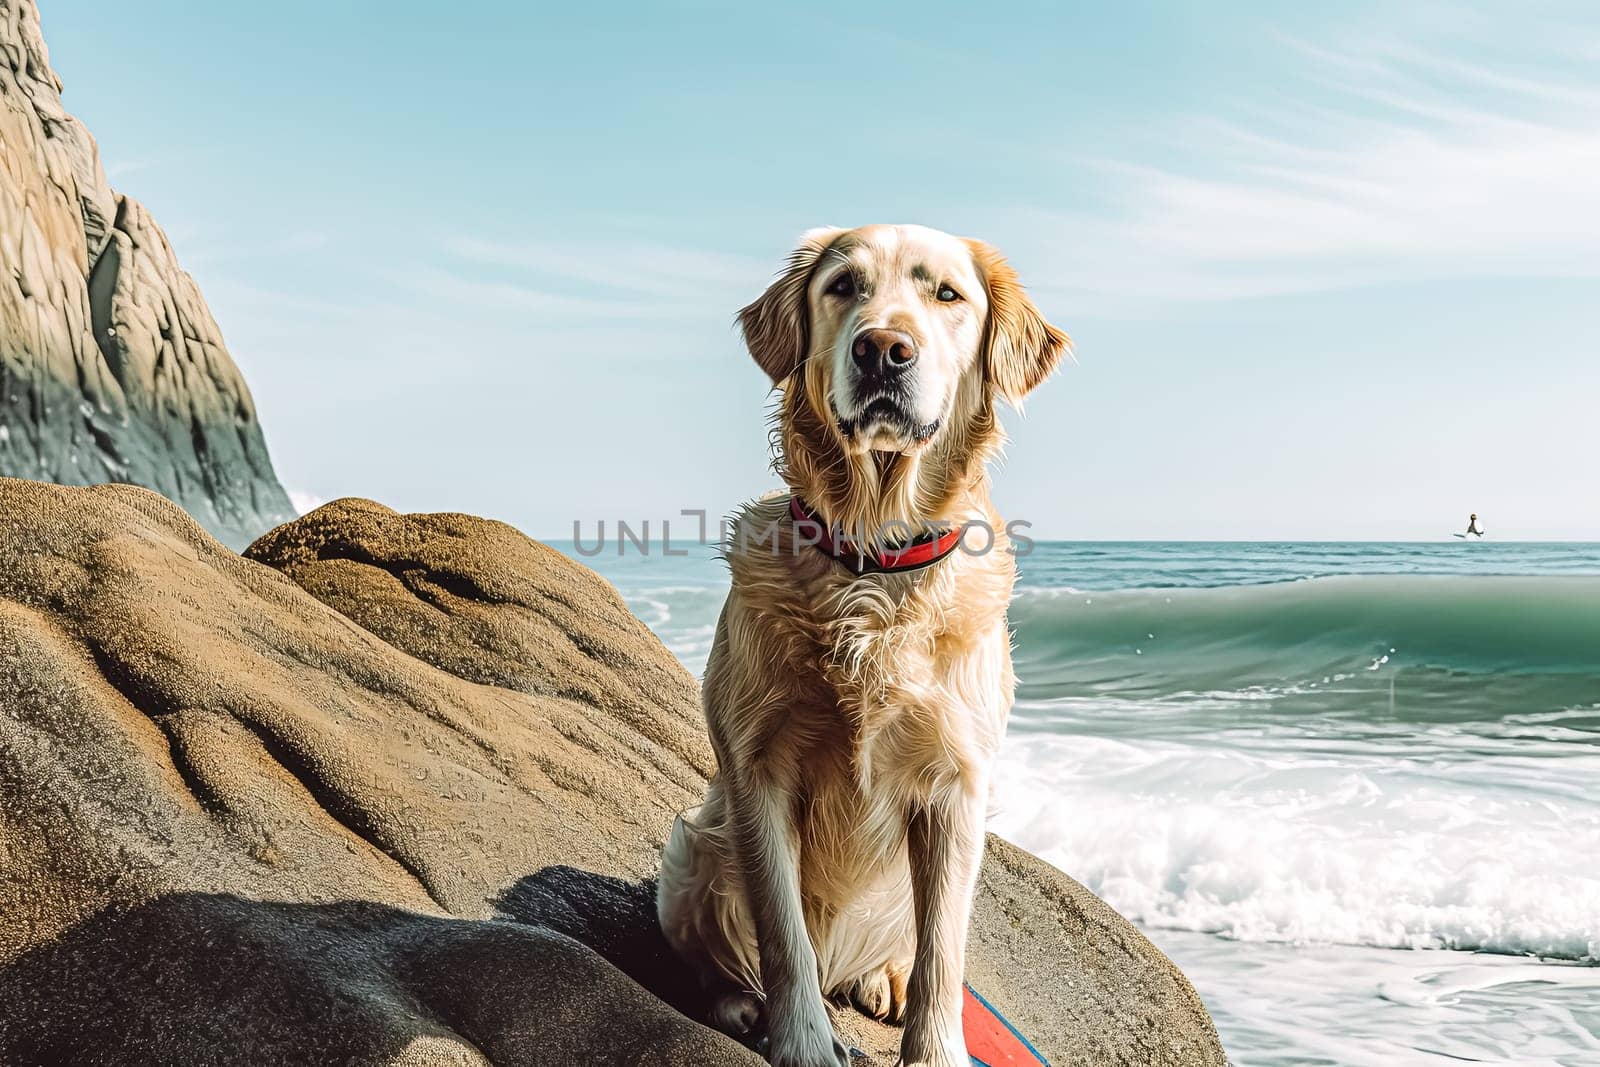 A dog is sitting on a surfboard in the ocean. The dog is happy and enjoying the water